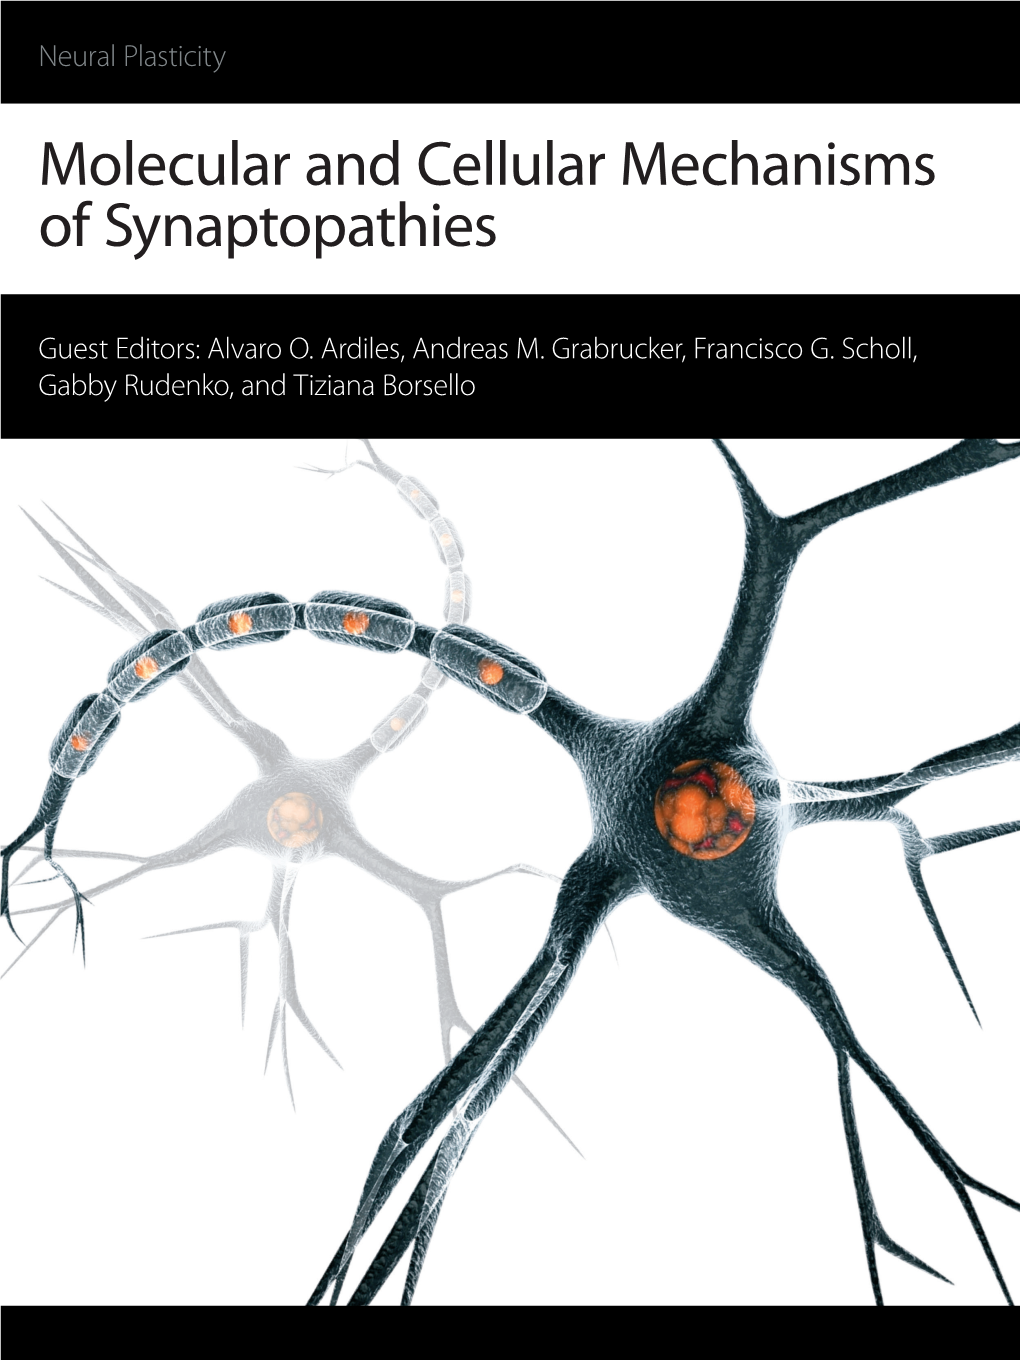 Molecular and Cellular Mechanisms of Synaptopathies